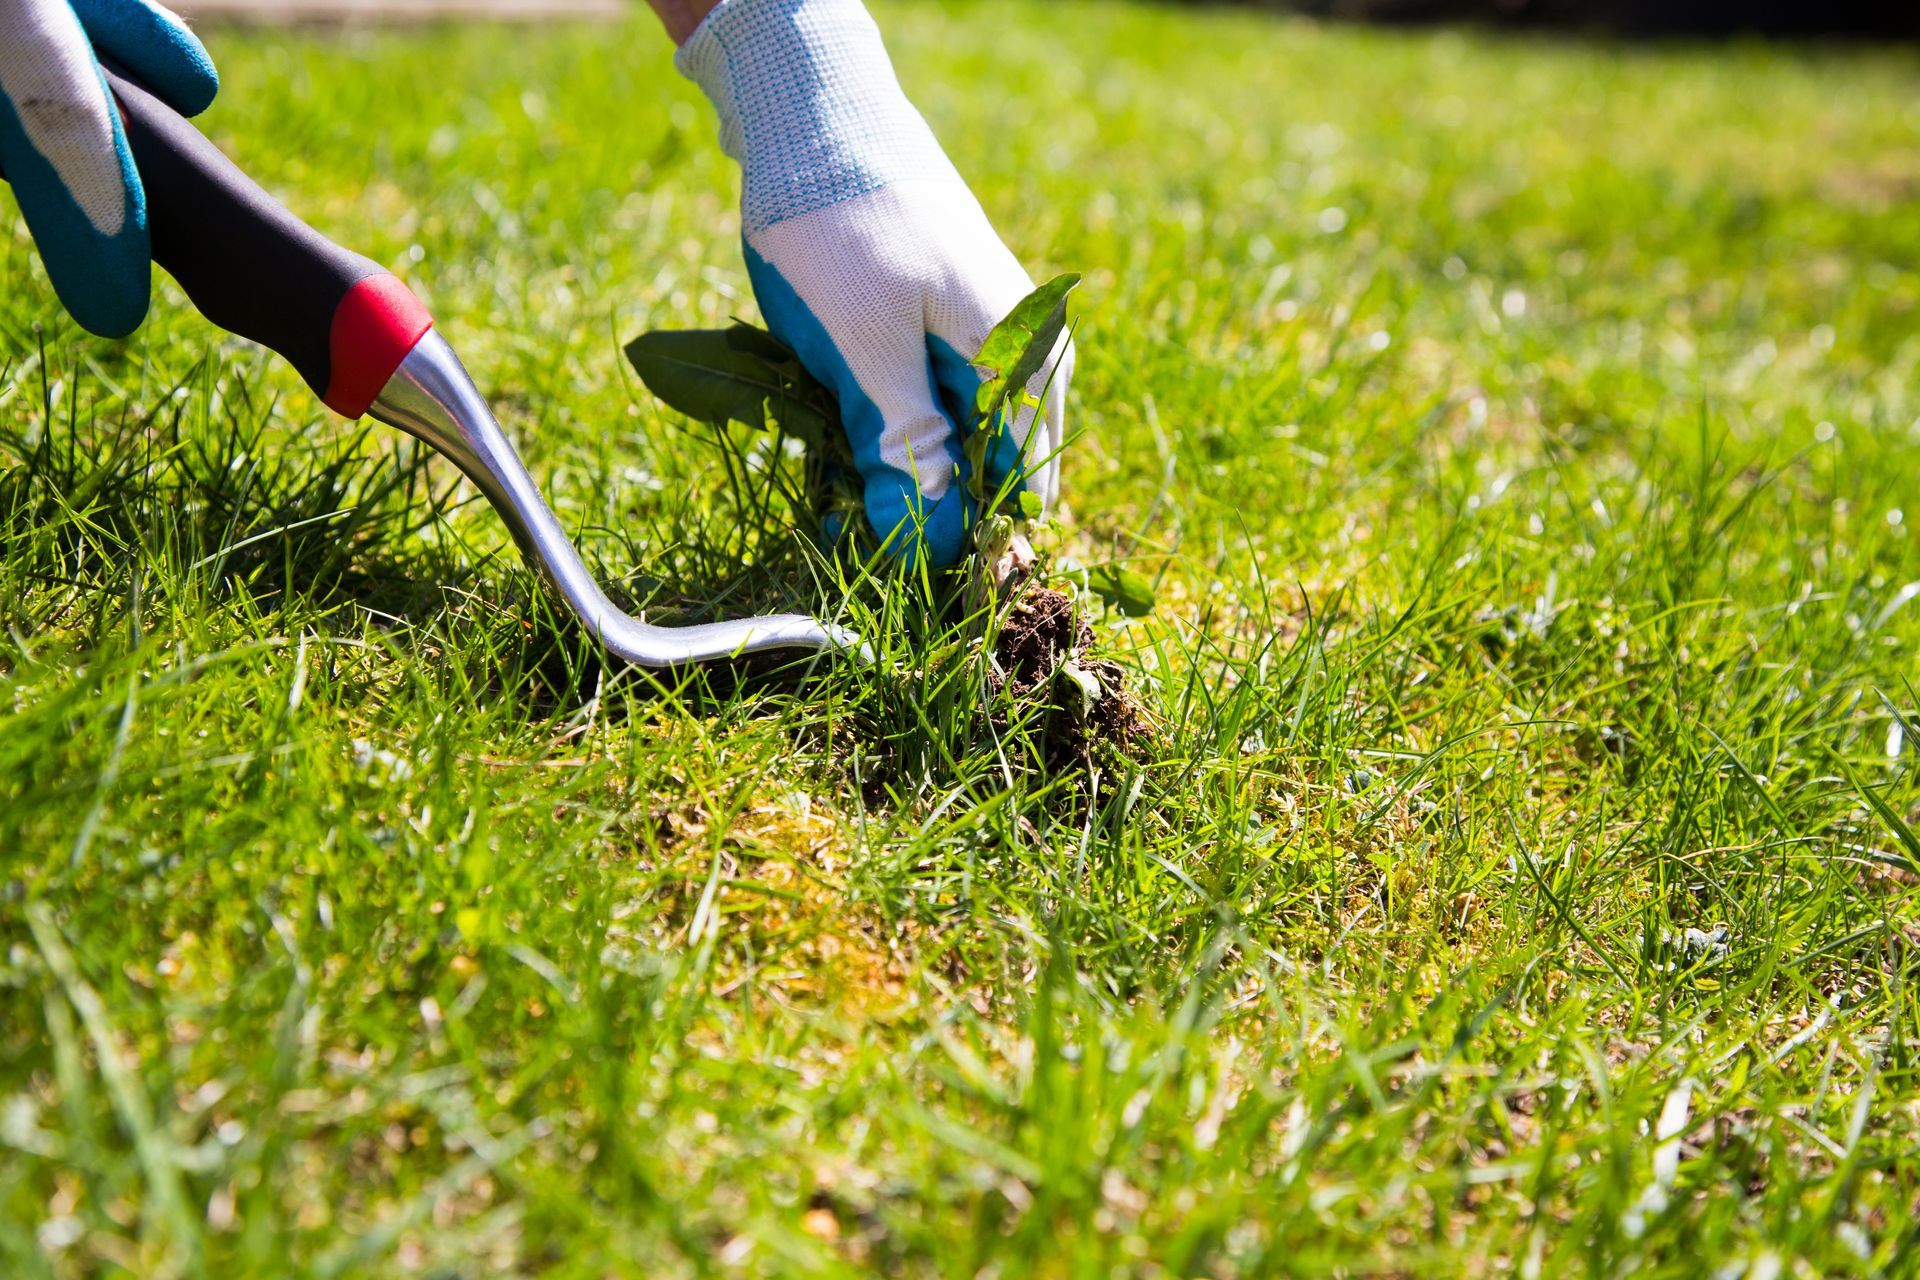 A person is using a fork to remove weeds from a lawn.